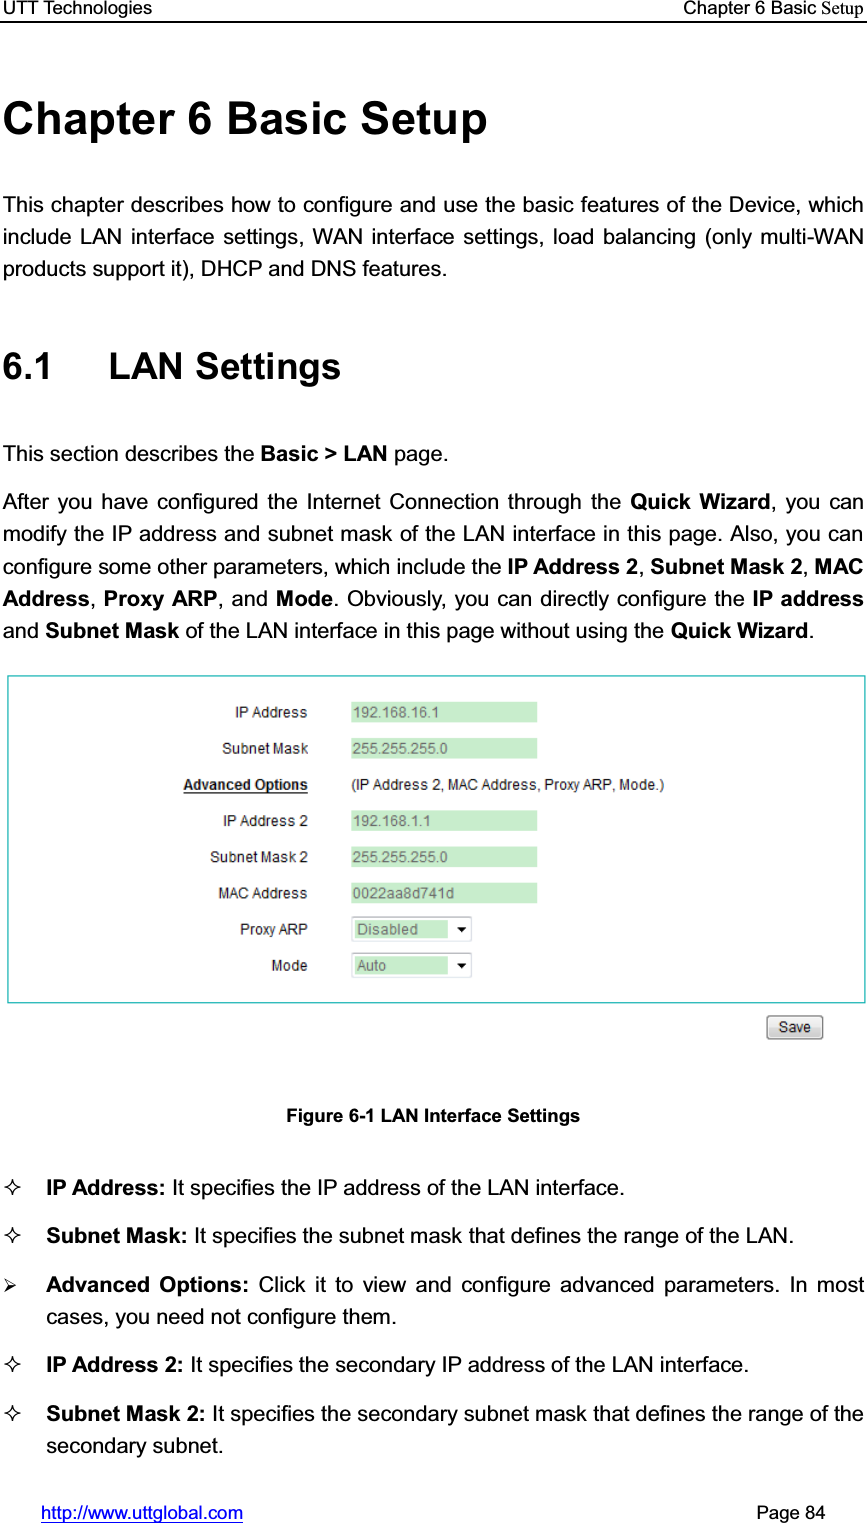 UTT Technologies    Chapter 6 Basic Setuphttp://www.uttglobal.com                                                       Page 84 Chapter 6 Basic Setup This chapter describes how to configure and use the basic features of the Device, which include LAN interface settings, WAN interface settings, load balancing (only multi-WAN products support it), DHCP and DNS features.   6.1 LAN Settings This section describes the Basic &gt; LAN page.  After you have configured the Internet Connection through the Quick Wizard, you can modify the IP address and subnet mask of the LAN interface in this page. Also, you can configure some other parameters, which include the IP Address 2,Subnet Mask 2,MAC Address,Proxy ARP, and Mode. Obviously, you can directly configure the IP addressand Subnet Mask of the LAN interface in this page without using the Quick Wizard.Figure 6-1 LAN Interface Settings IP Address: It specifies the IP address of the LAN interface. Subnet Mask: It specifies the subnet mask that defines the range of the LAN. ¾Advanced Options: Click it to view and configure advanced parameters. In most cases, you need not configure them. IP Address 2: It specifies the secondary IP address of the LAN interface. Subnet Mask 2: It specifies the secondary subnet mask that defines the range of the secondary subnet. 